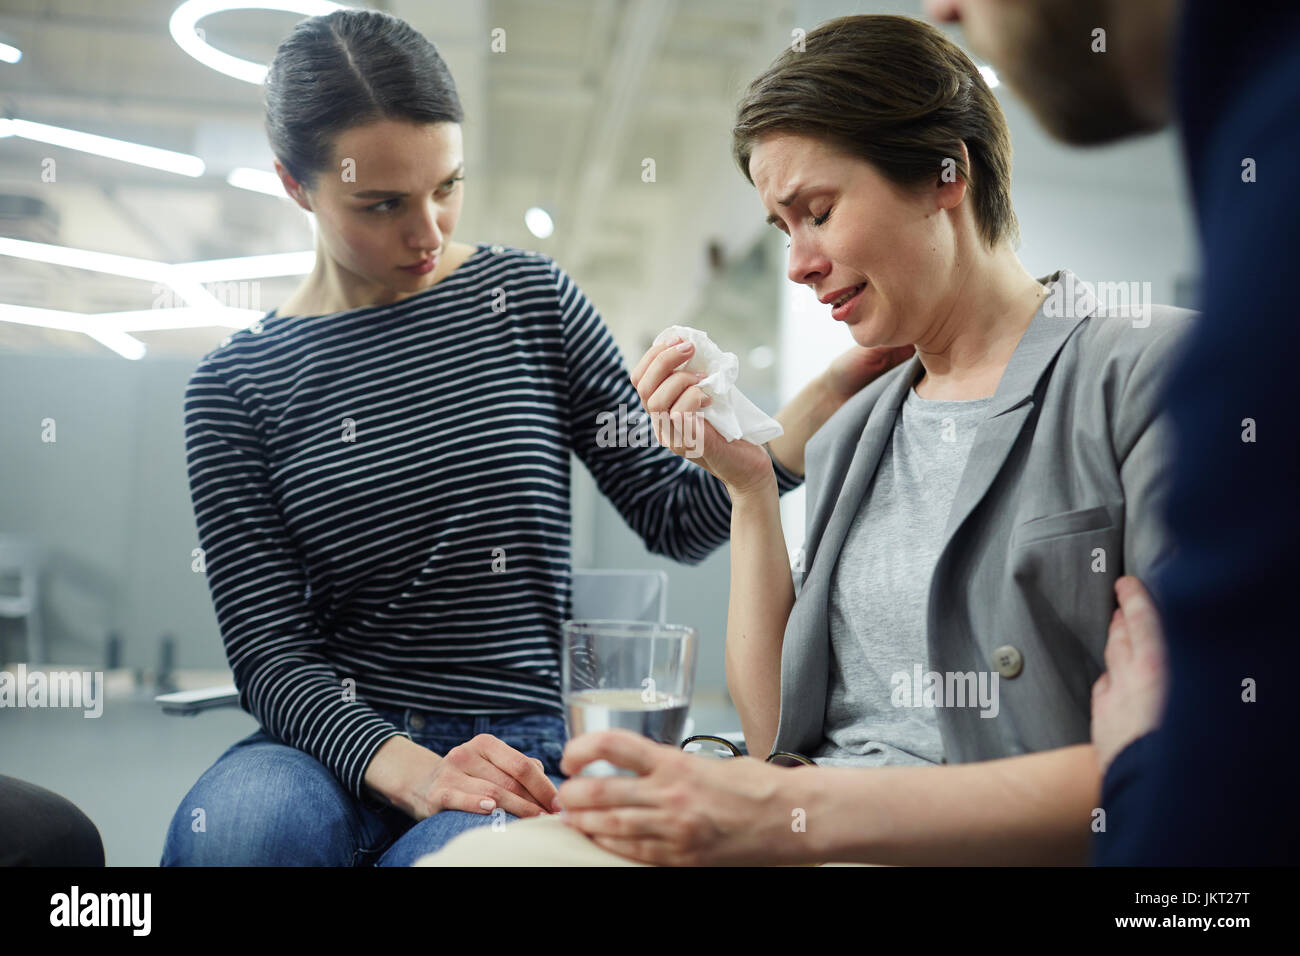 Crying woman telling her problem while compassionate friends listening to her Stock Photo